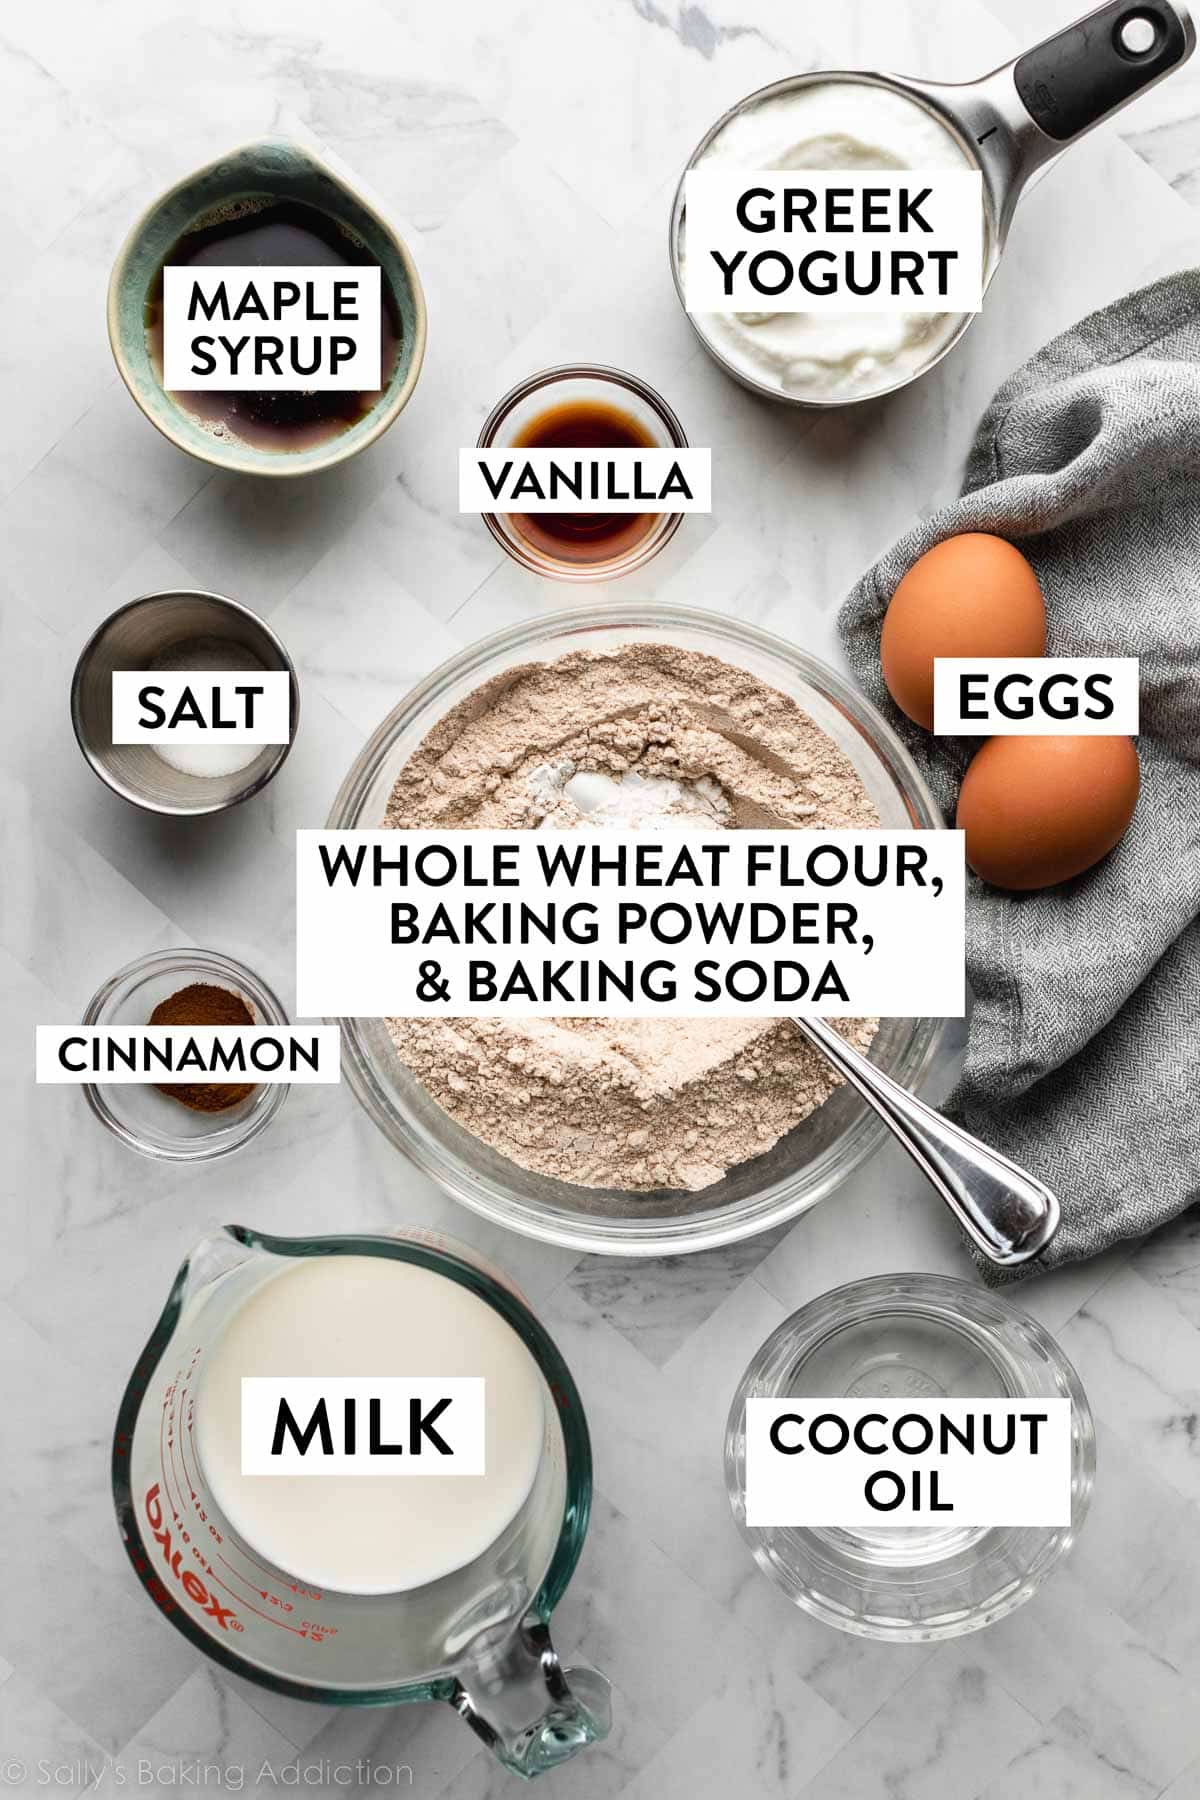 ingredients in bowls on counter including whole wheat flour, coconut oil, Greek yogurt, and maple syrup.